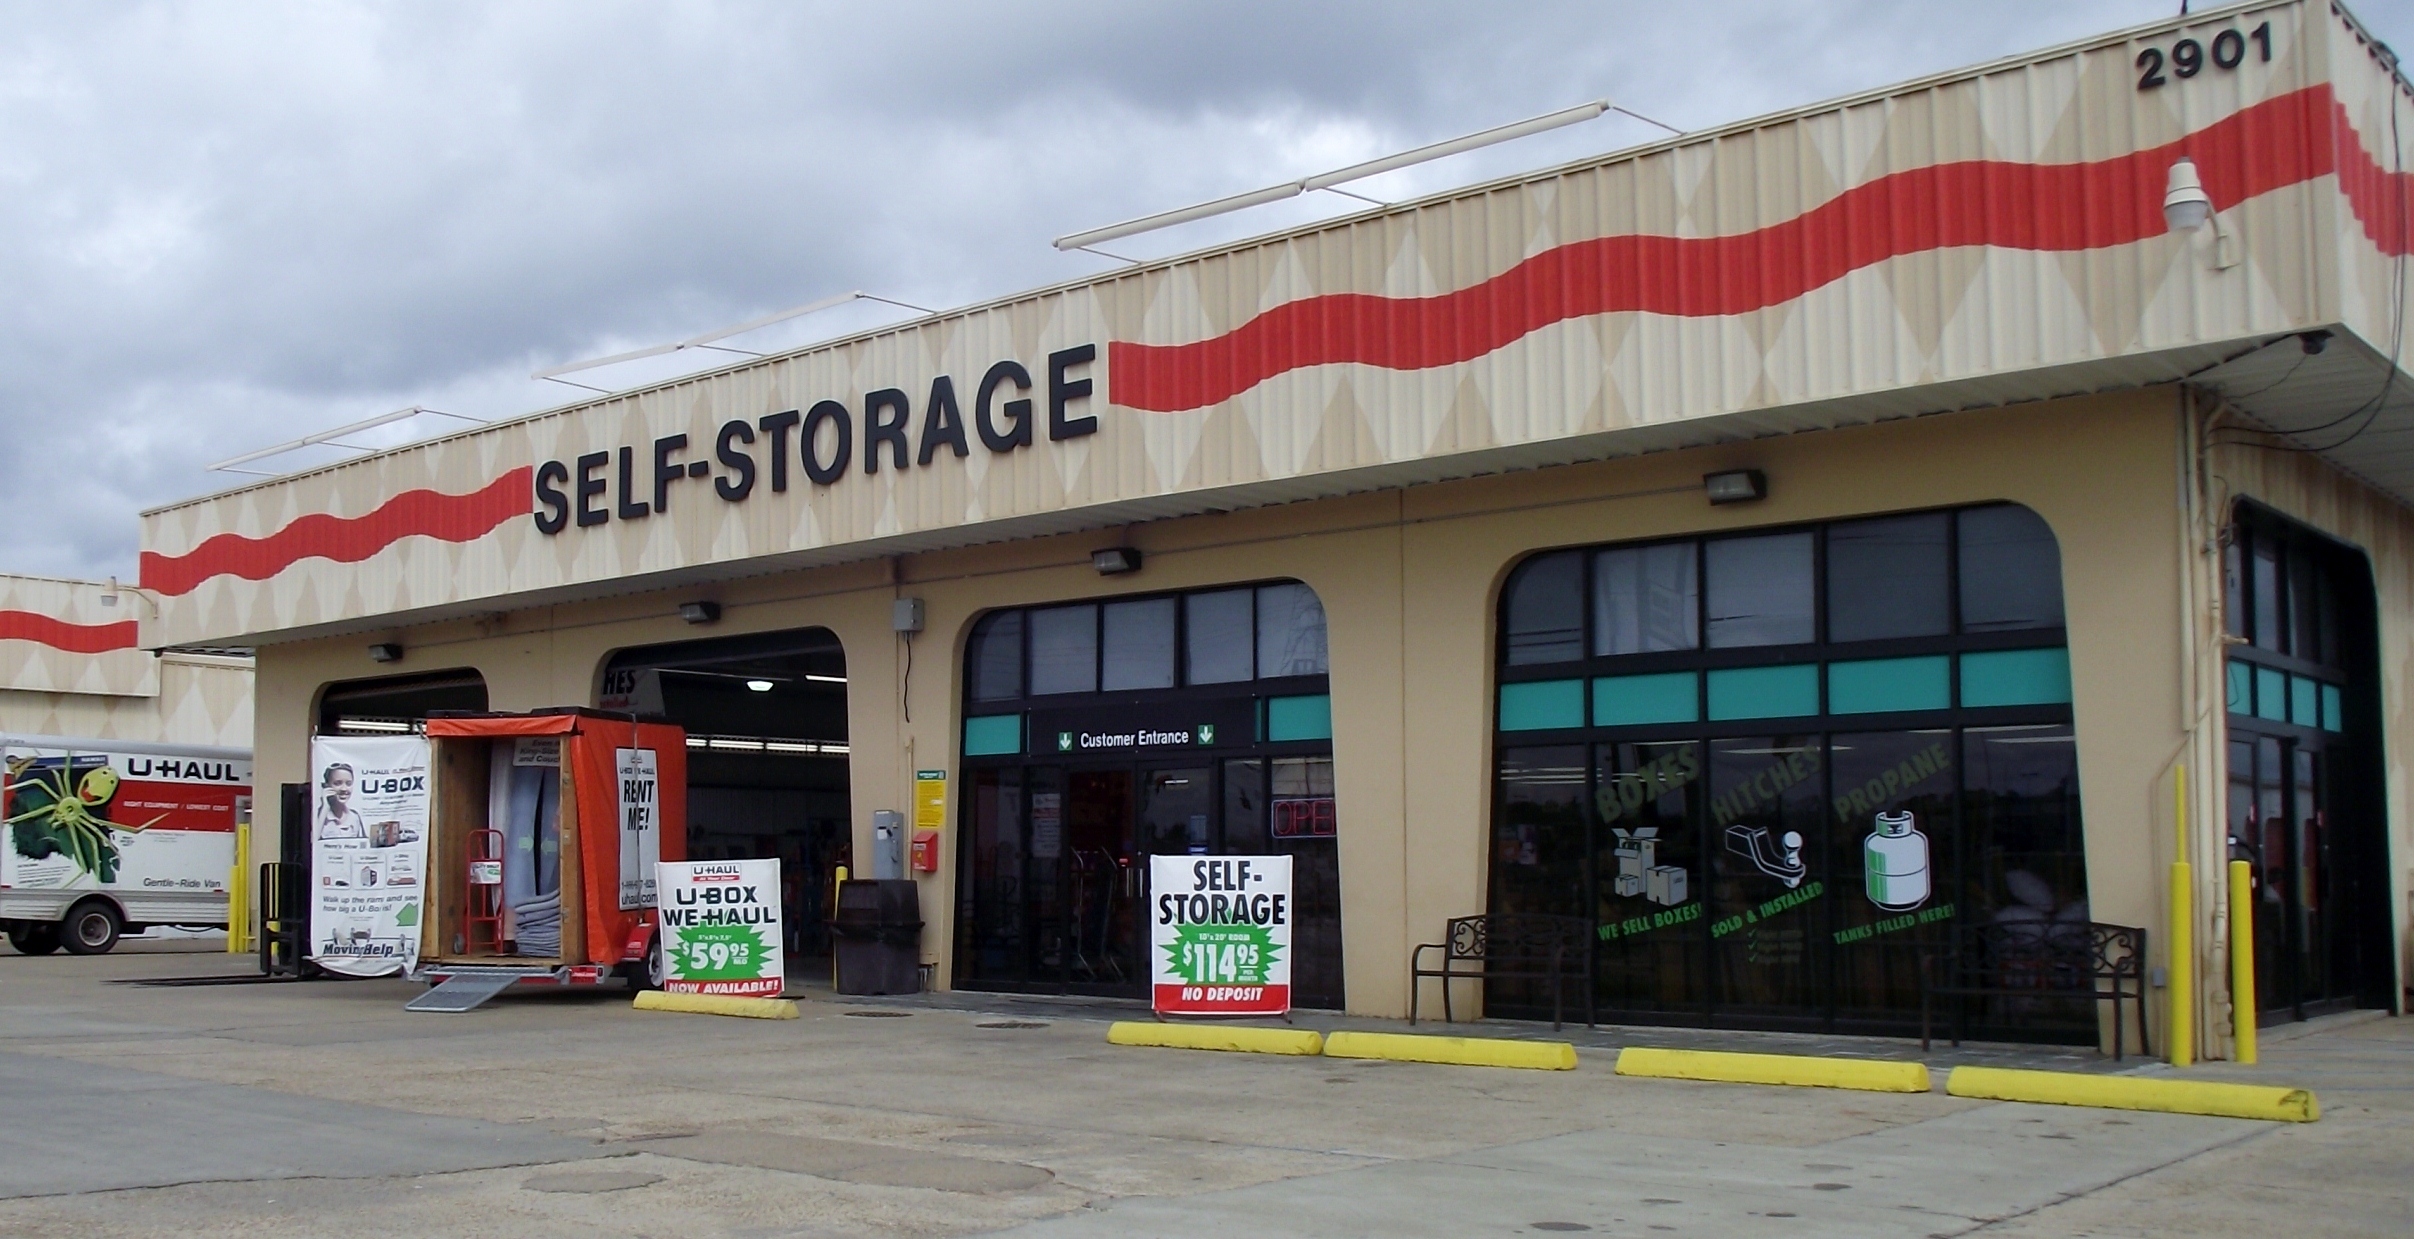 U-Haul Company of South Central Louisiana is offering free self-storage to residents who were impacted by wind damage and severe storms associated with a possible tornado early Thursday morning.